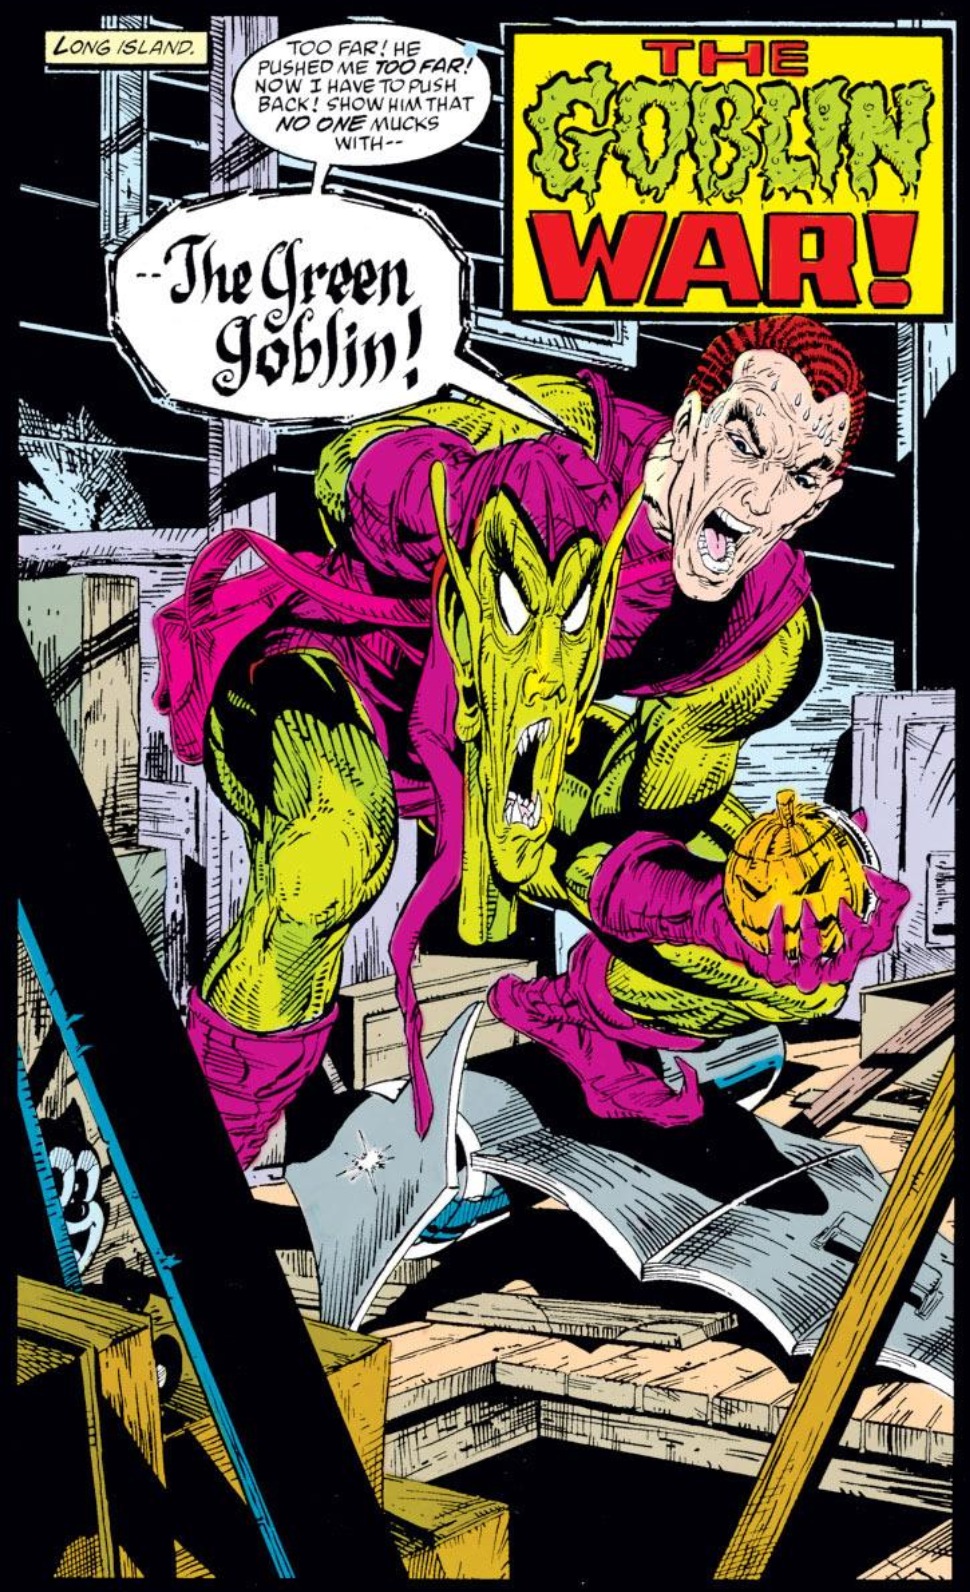 From Amazing Spider-Man #312